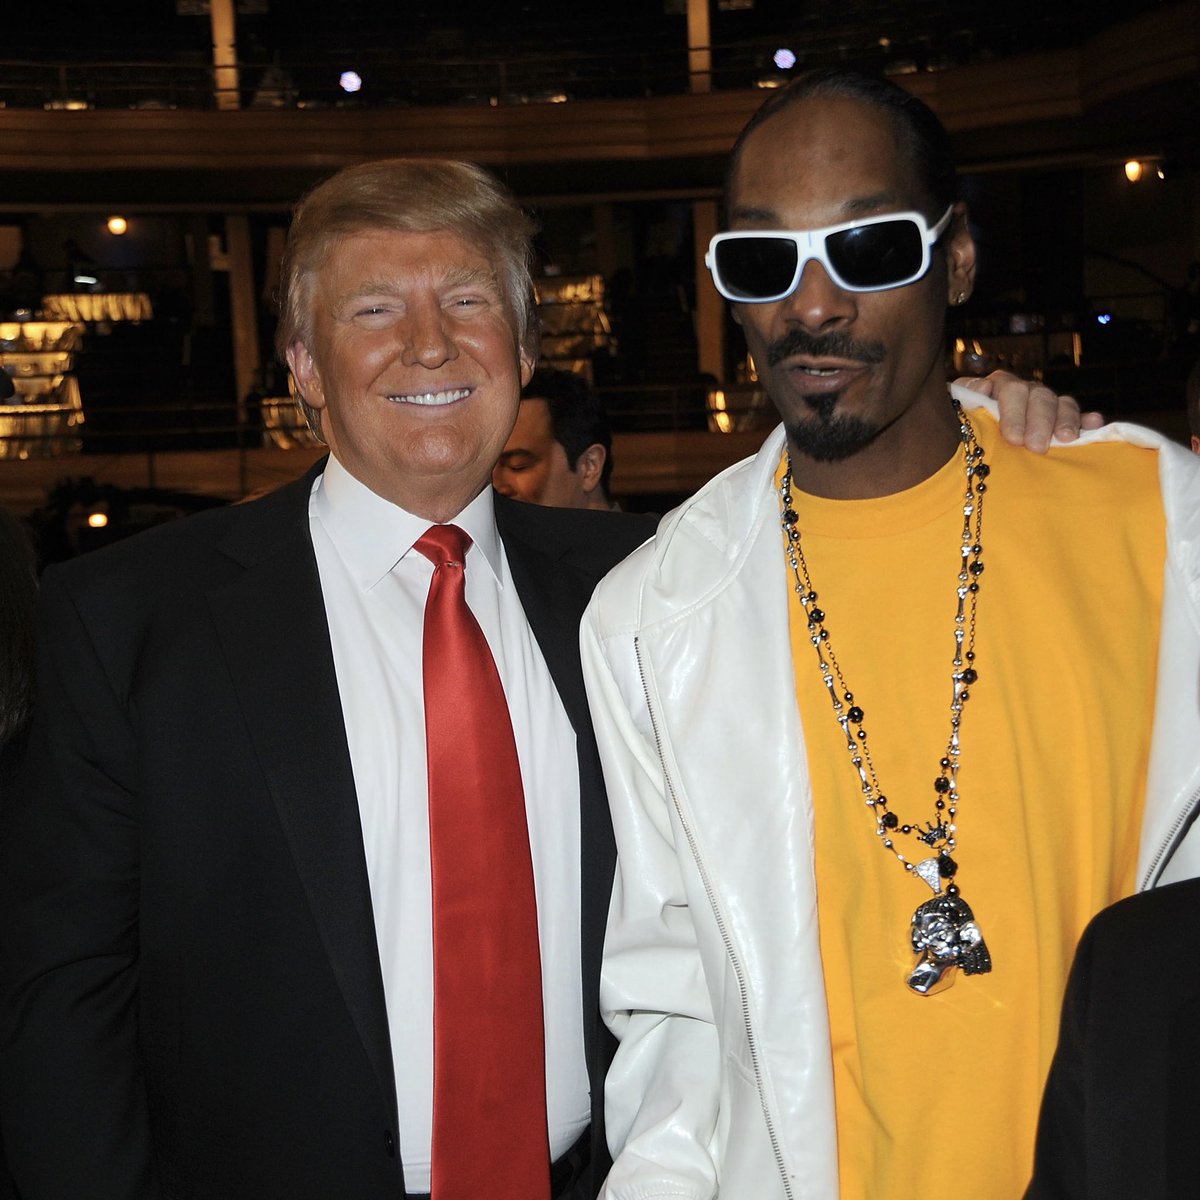 JUST IN: Snoop Dogg says he now has “nothing but love and respect” for Donald Trump. Wow. The comments came during an interview with The Times. “Donald Trump? He ain’t done nothing wrong to me. He has done only great things for me.” Snoop specifically pointed to how Trump